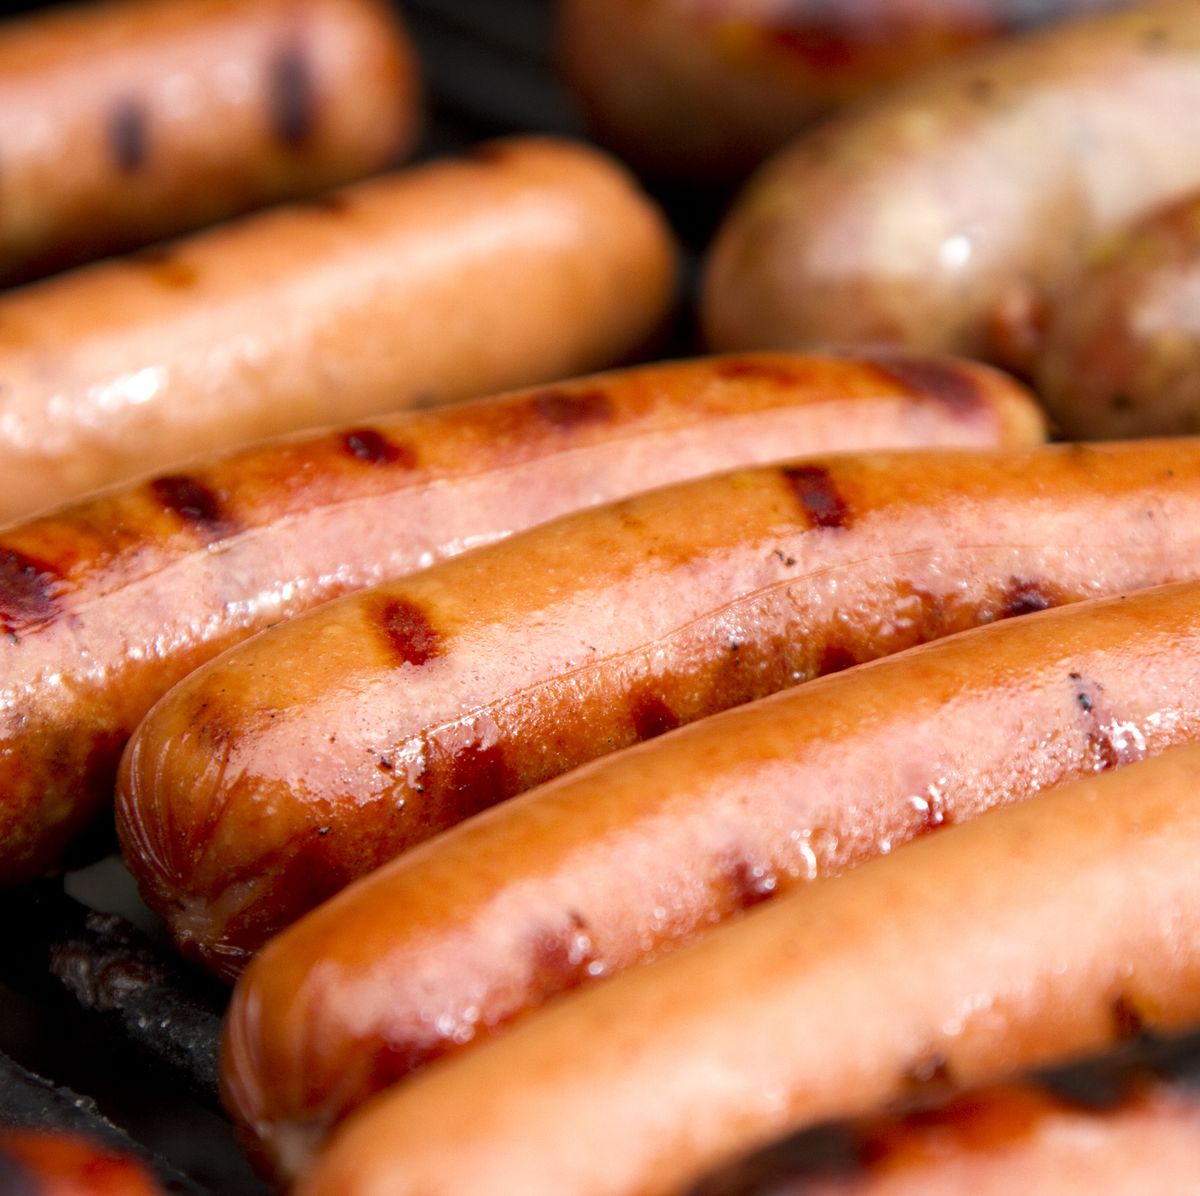 How to Grill Hot Dogs Perfectly